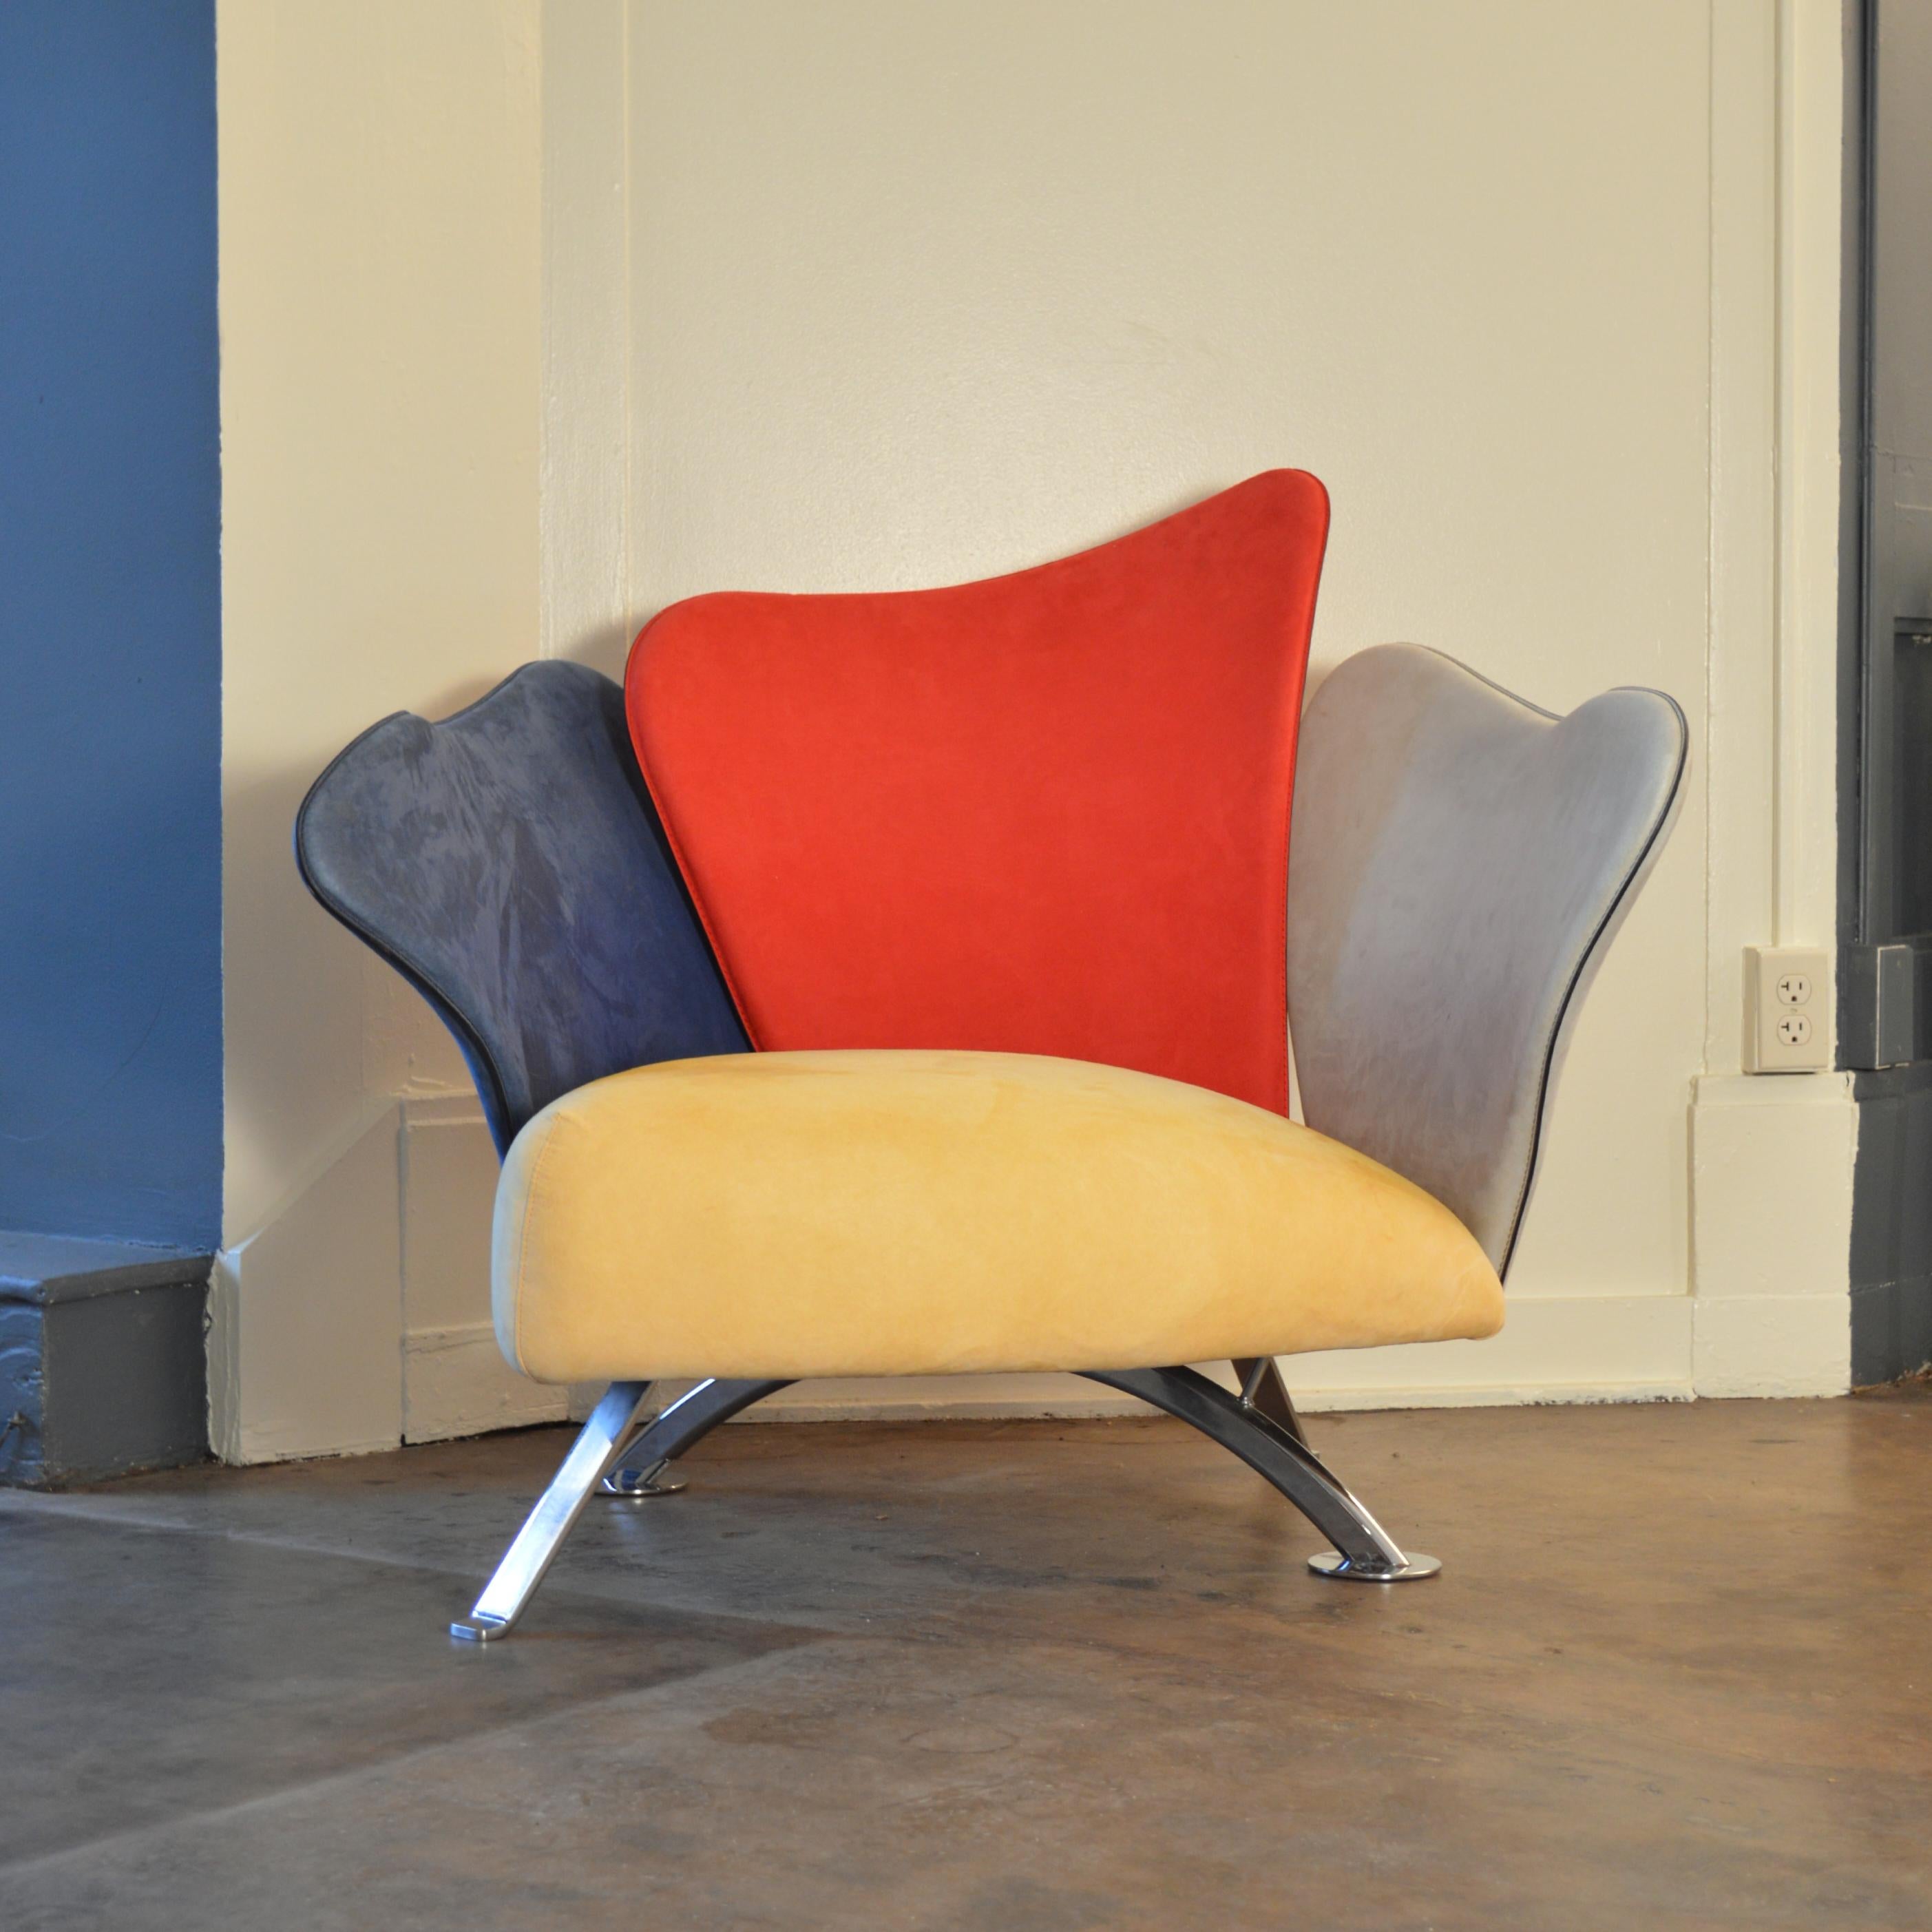 Post-Modern Flower Chair in primary color scheme, designed by Giorgio Saporiti. Made by Il Loft of Italy, circa 1990.  Each Saporiti Flower chair is completely unique. The chair's organic 'petals' are made of hand-formed steel shapes. Each piece is